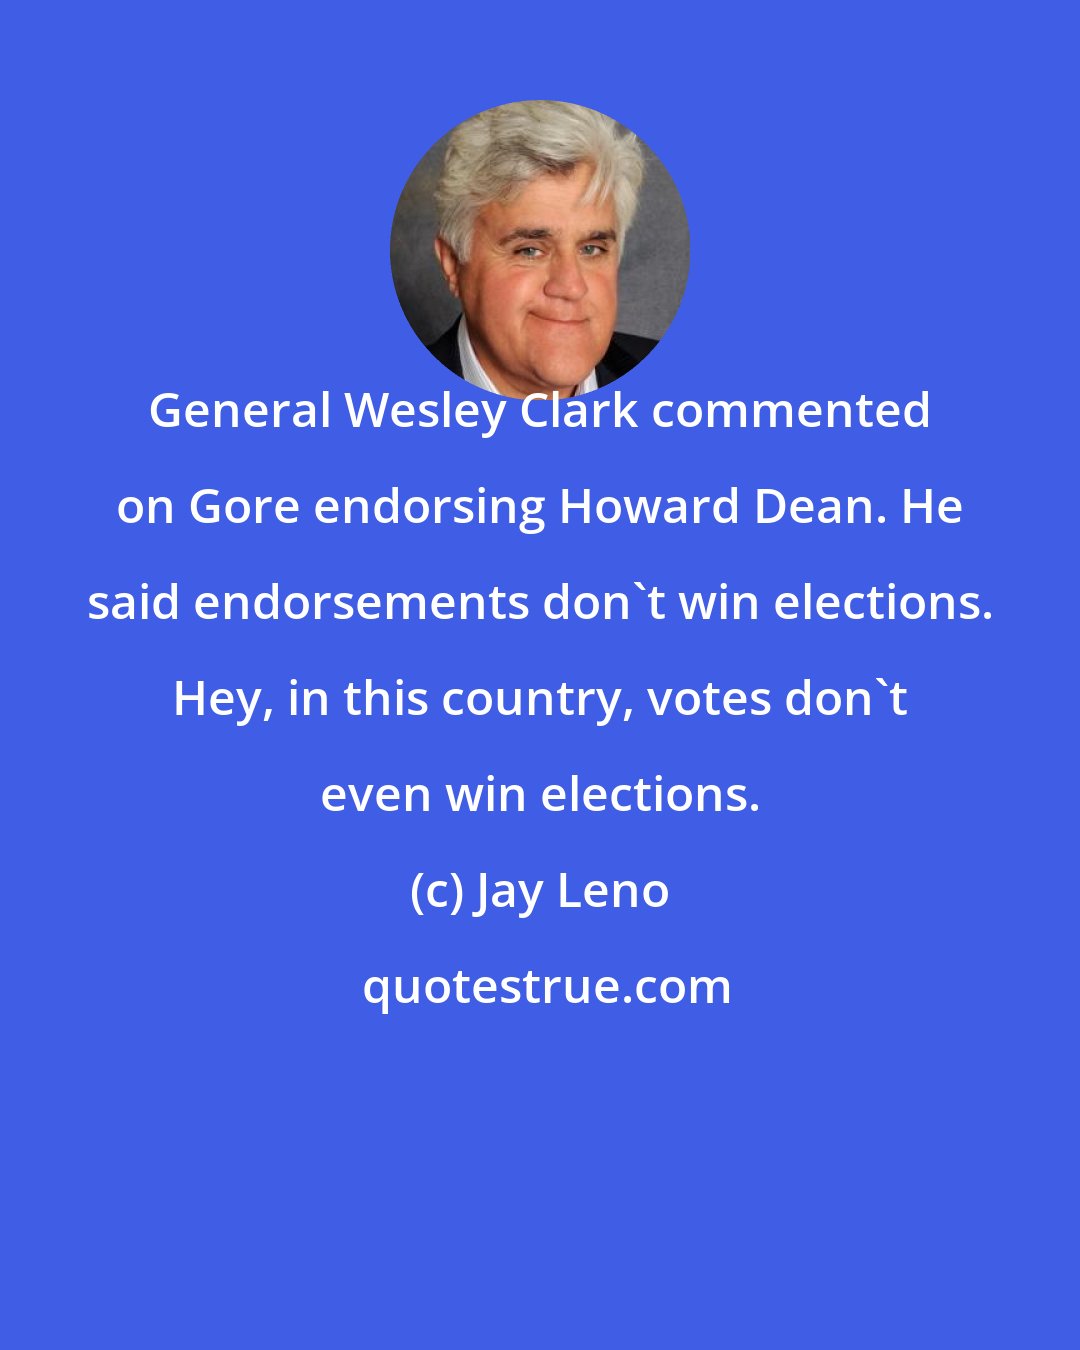 Jay Leno: General Wesley Clark commented on Gore endorsing Howard Dean. He said endorsements don't win elections. Hey, in this country, votes don't even win elections.